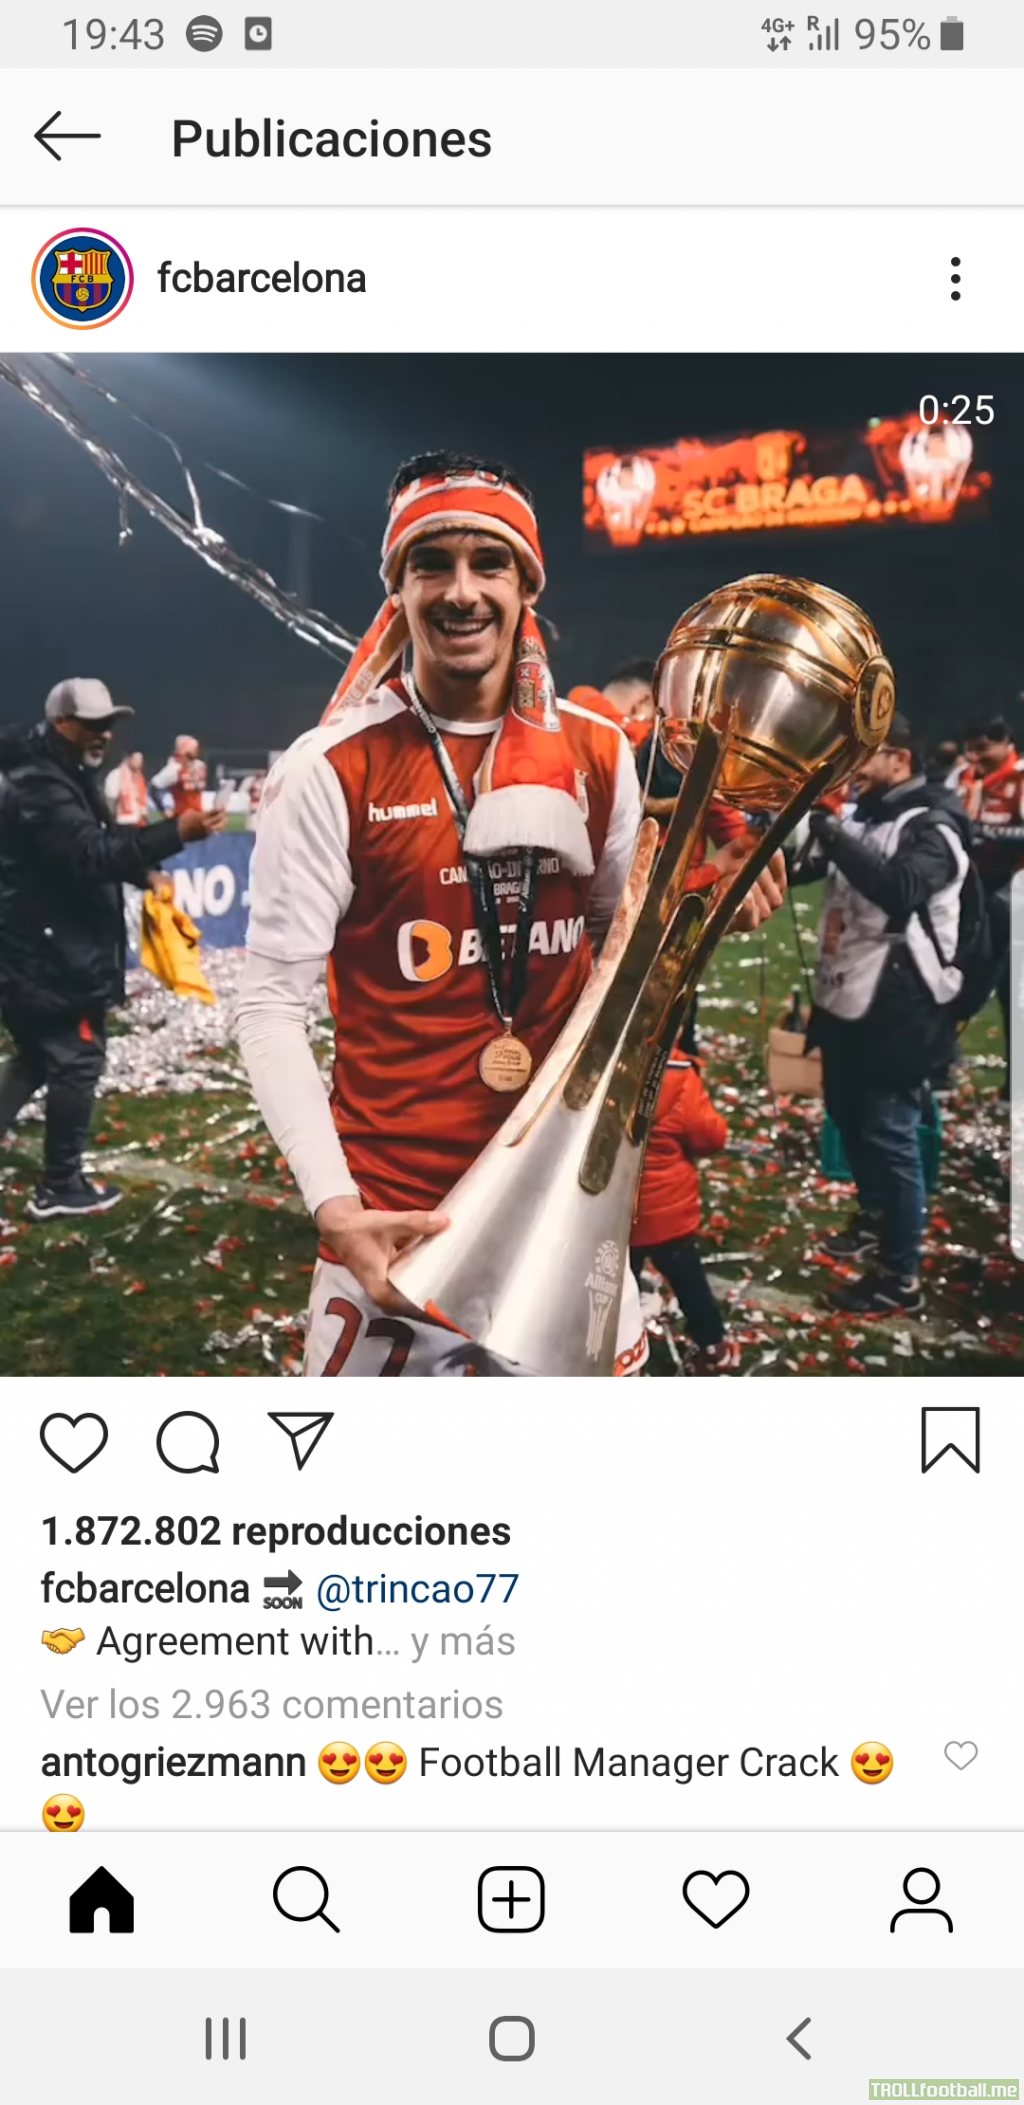 Antoine Griezmann commented "Football Manager crack" on FC Barcelona's post announcing the signing of Trincão.